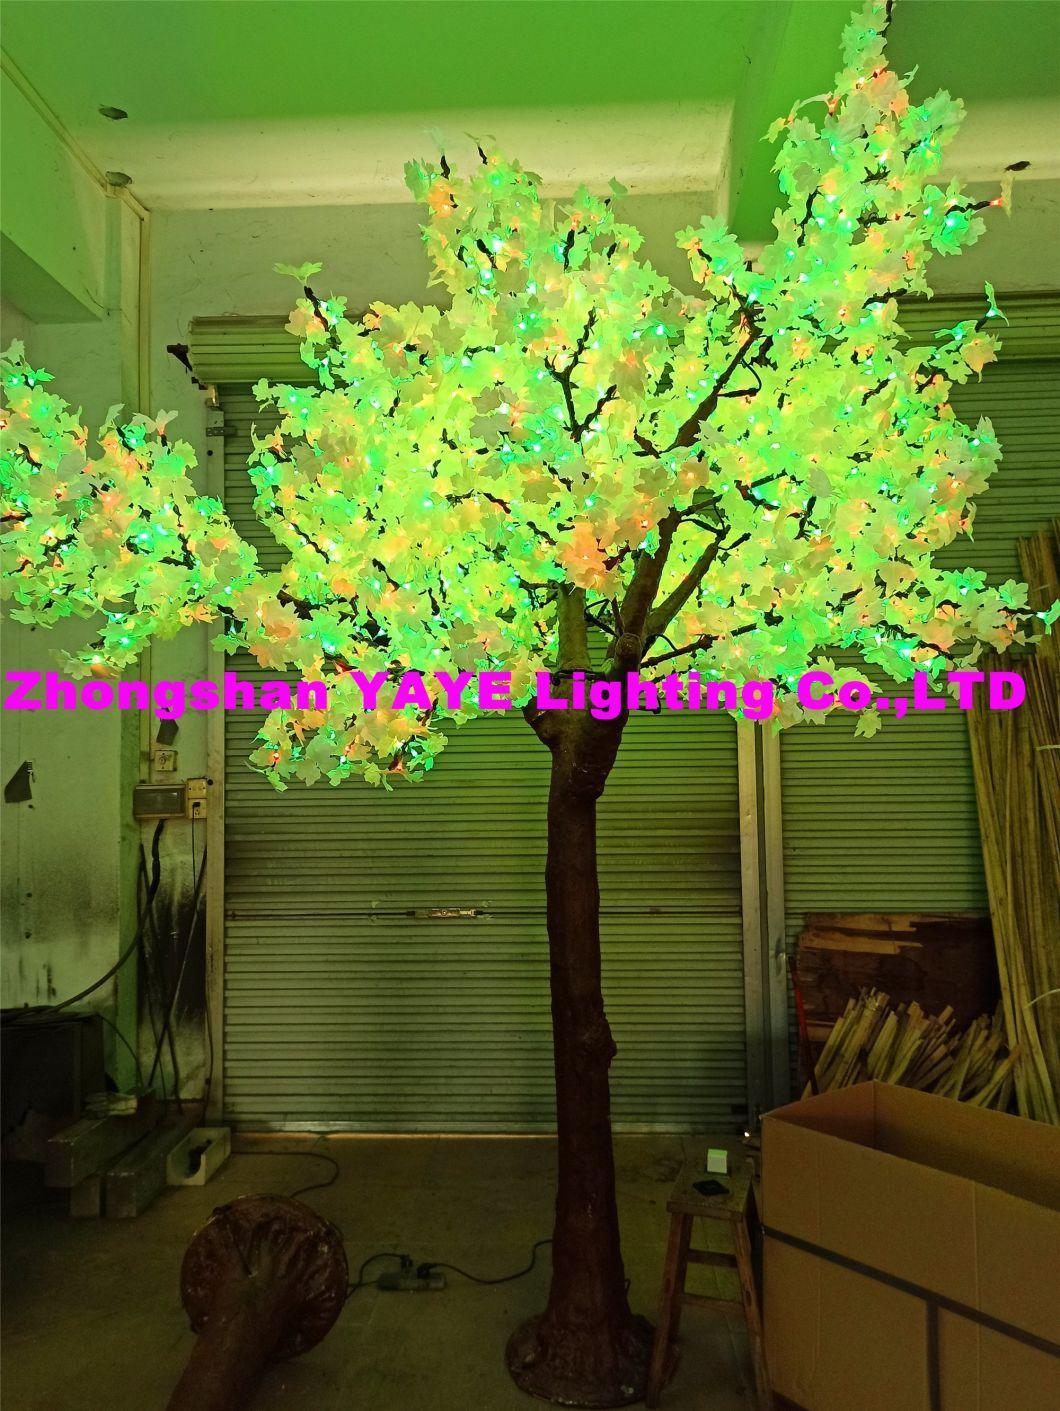 Yaye Hot Sell Waterproof IP65 Ce RGB LED Maple Tree Light with Warranty 2 Years (Pls contact us, YAYE have many many interesting LED Trees for your selecting)